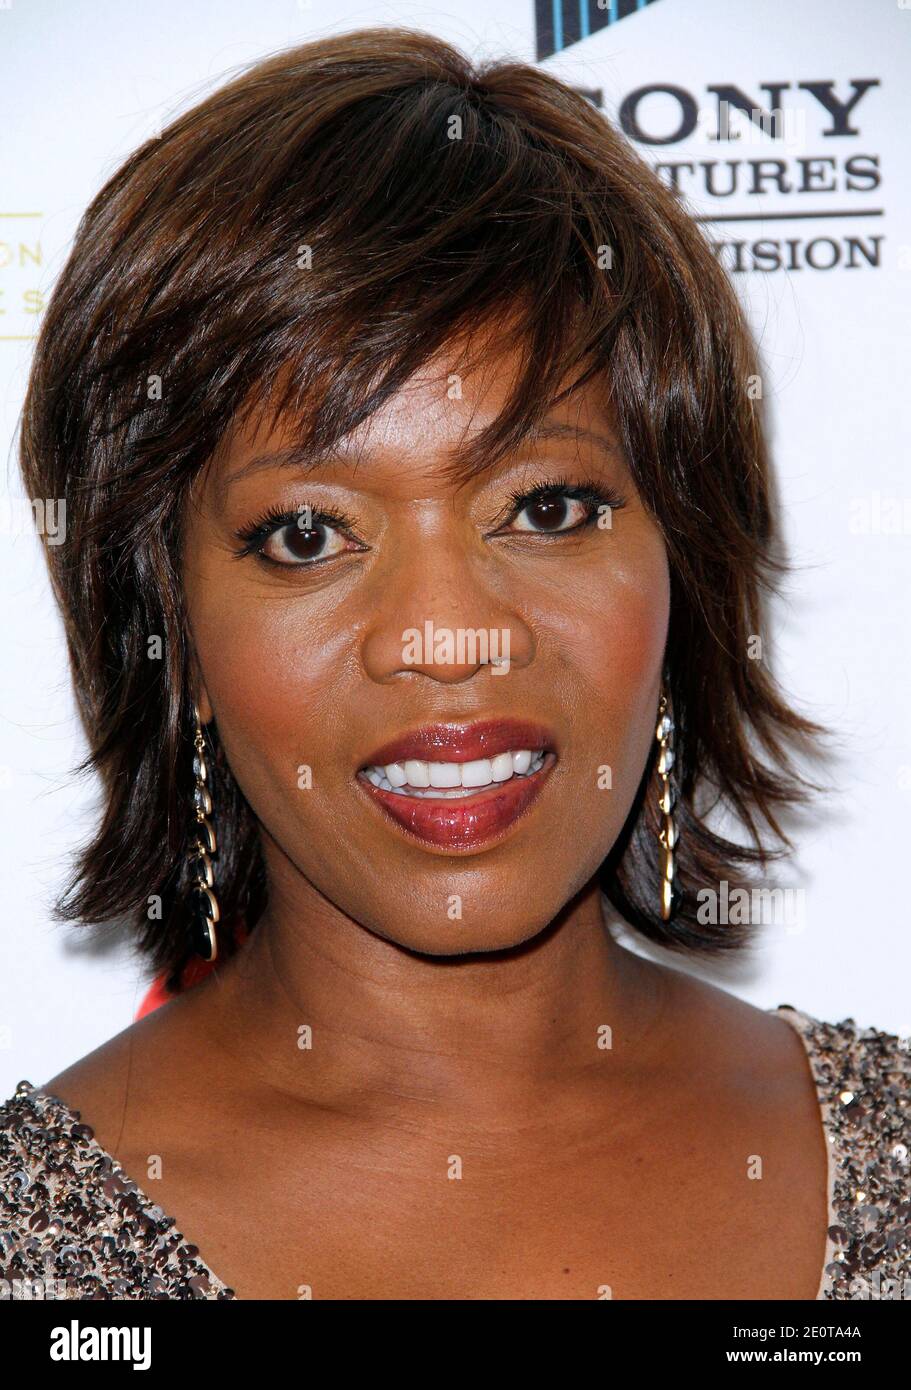 Alfre Woodward attends the Steel Magnolias Premiere at the Paris Theater in New York City, NY, USA, on October 3, 2012. Photo by Donna Ward/ABACAPRESS.COM Stock Photo